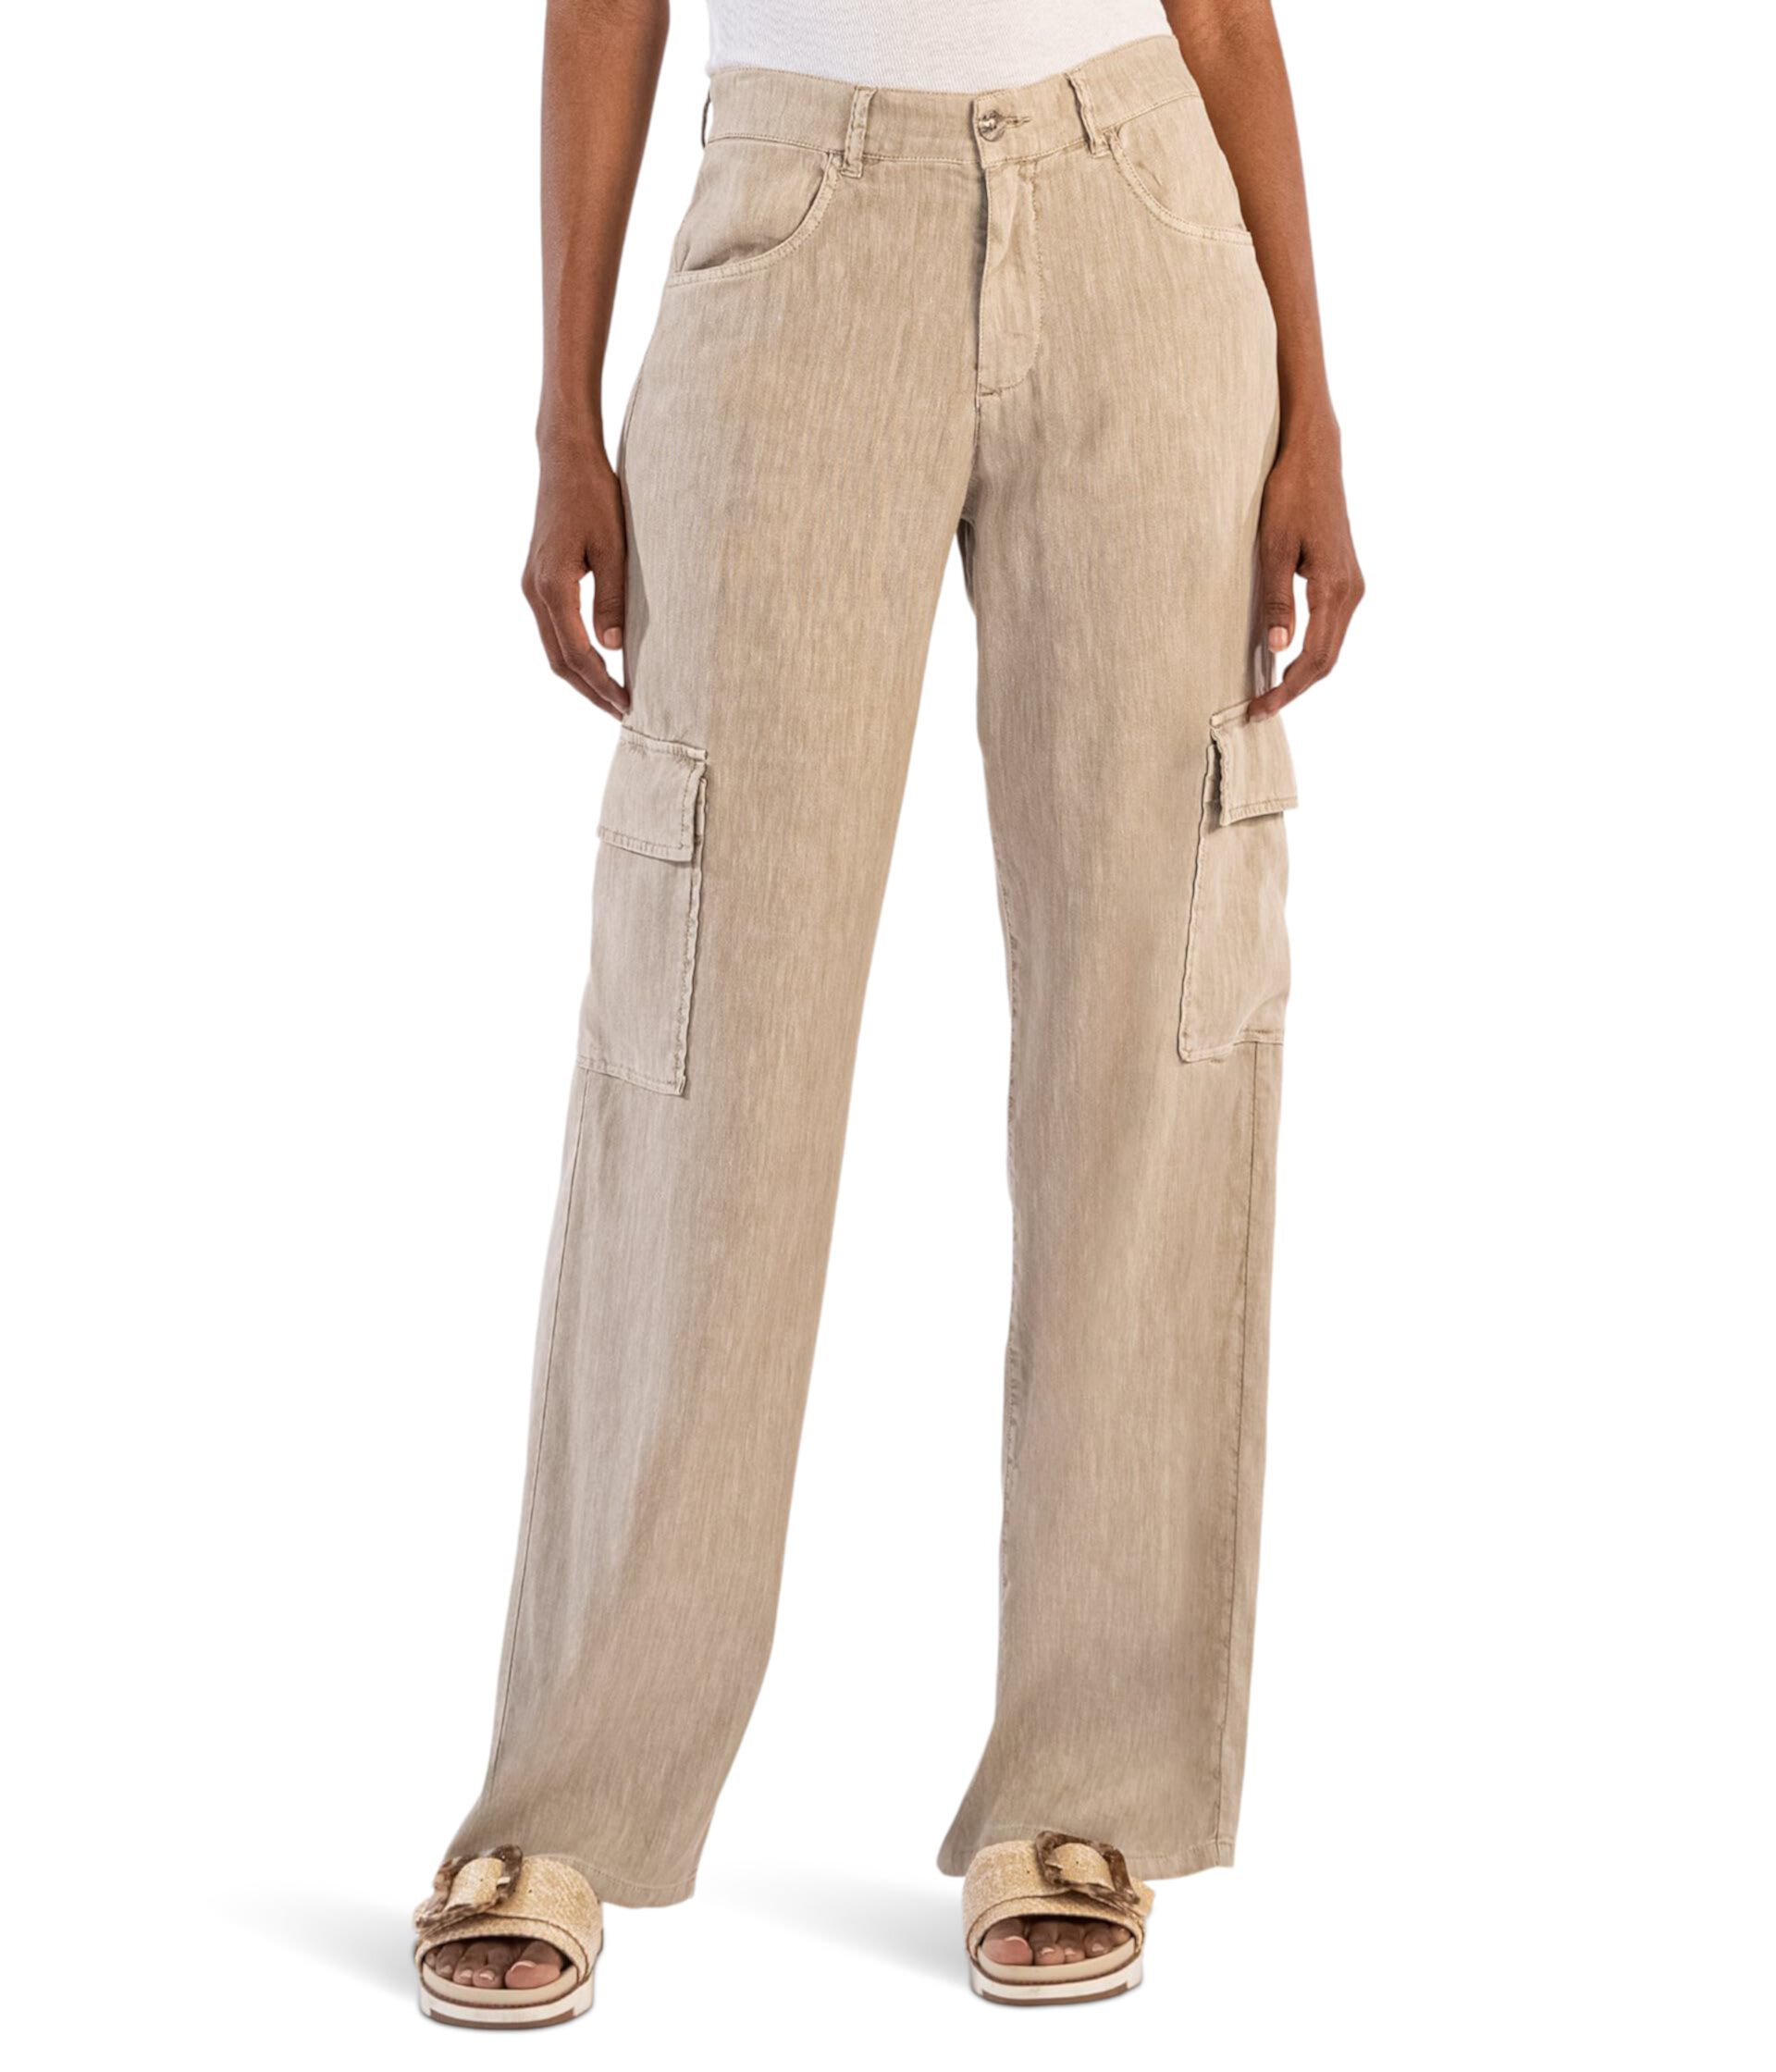 Akia - Wide Leg Pants With Cargo Pockets KUT from the Kloth